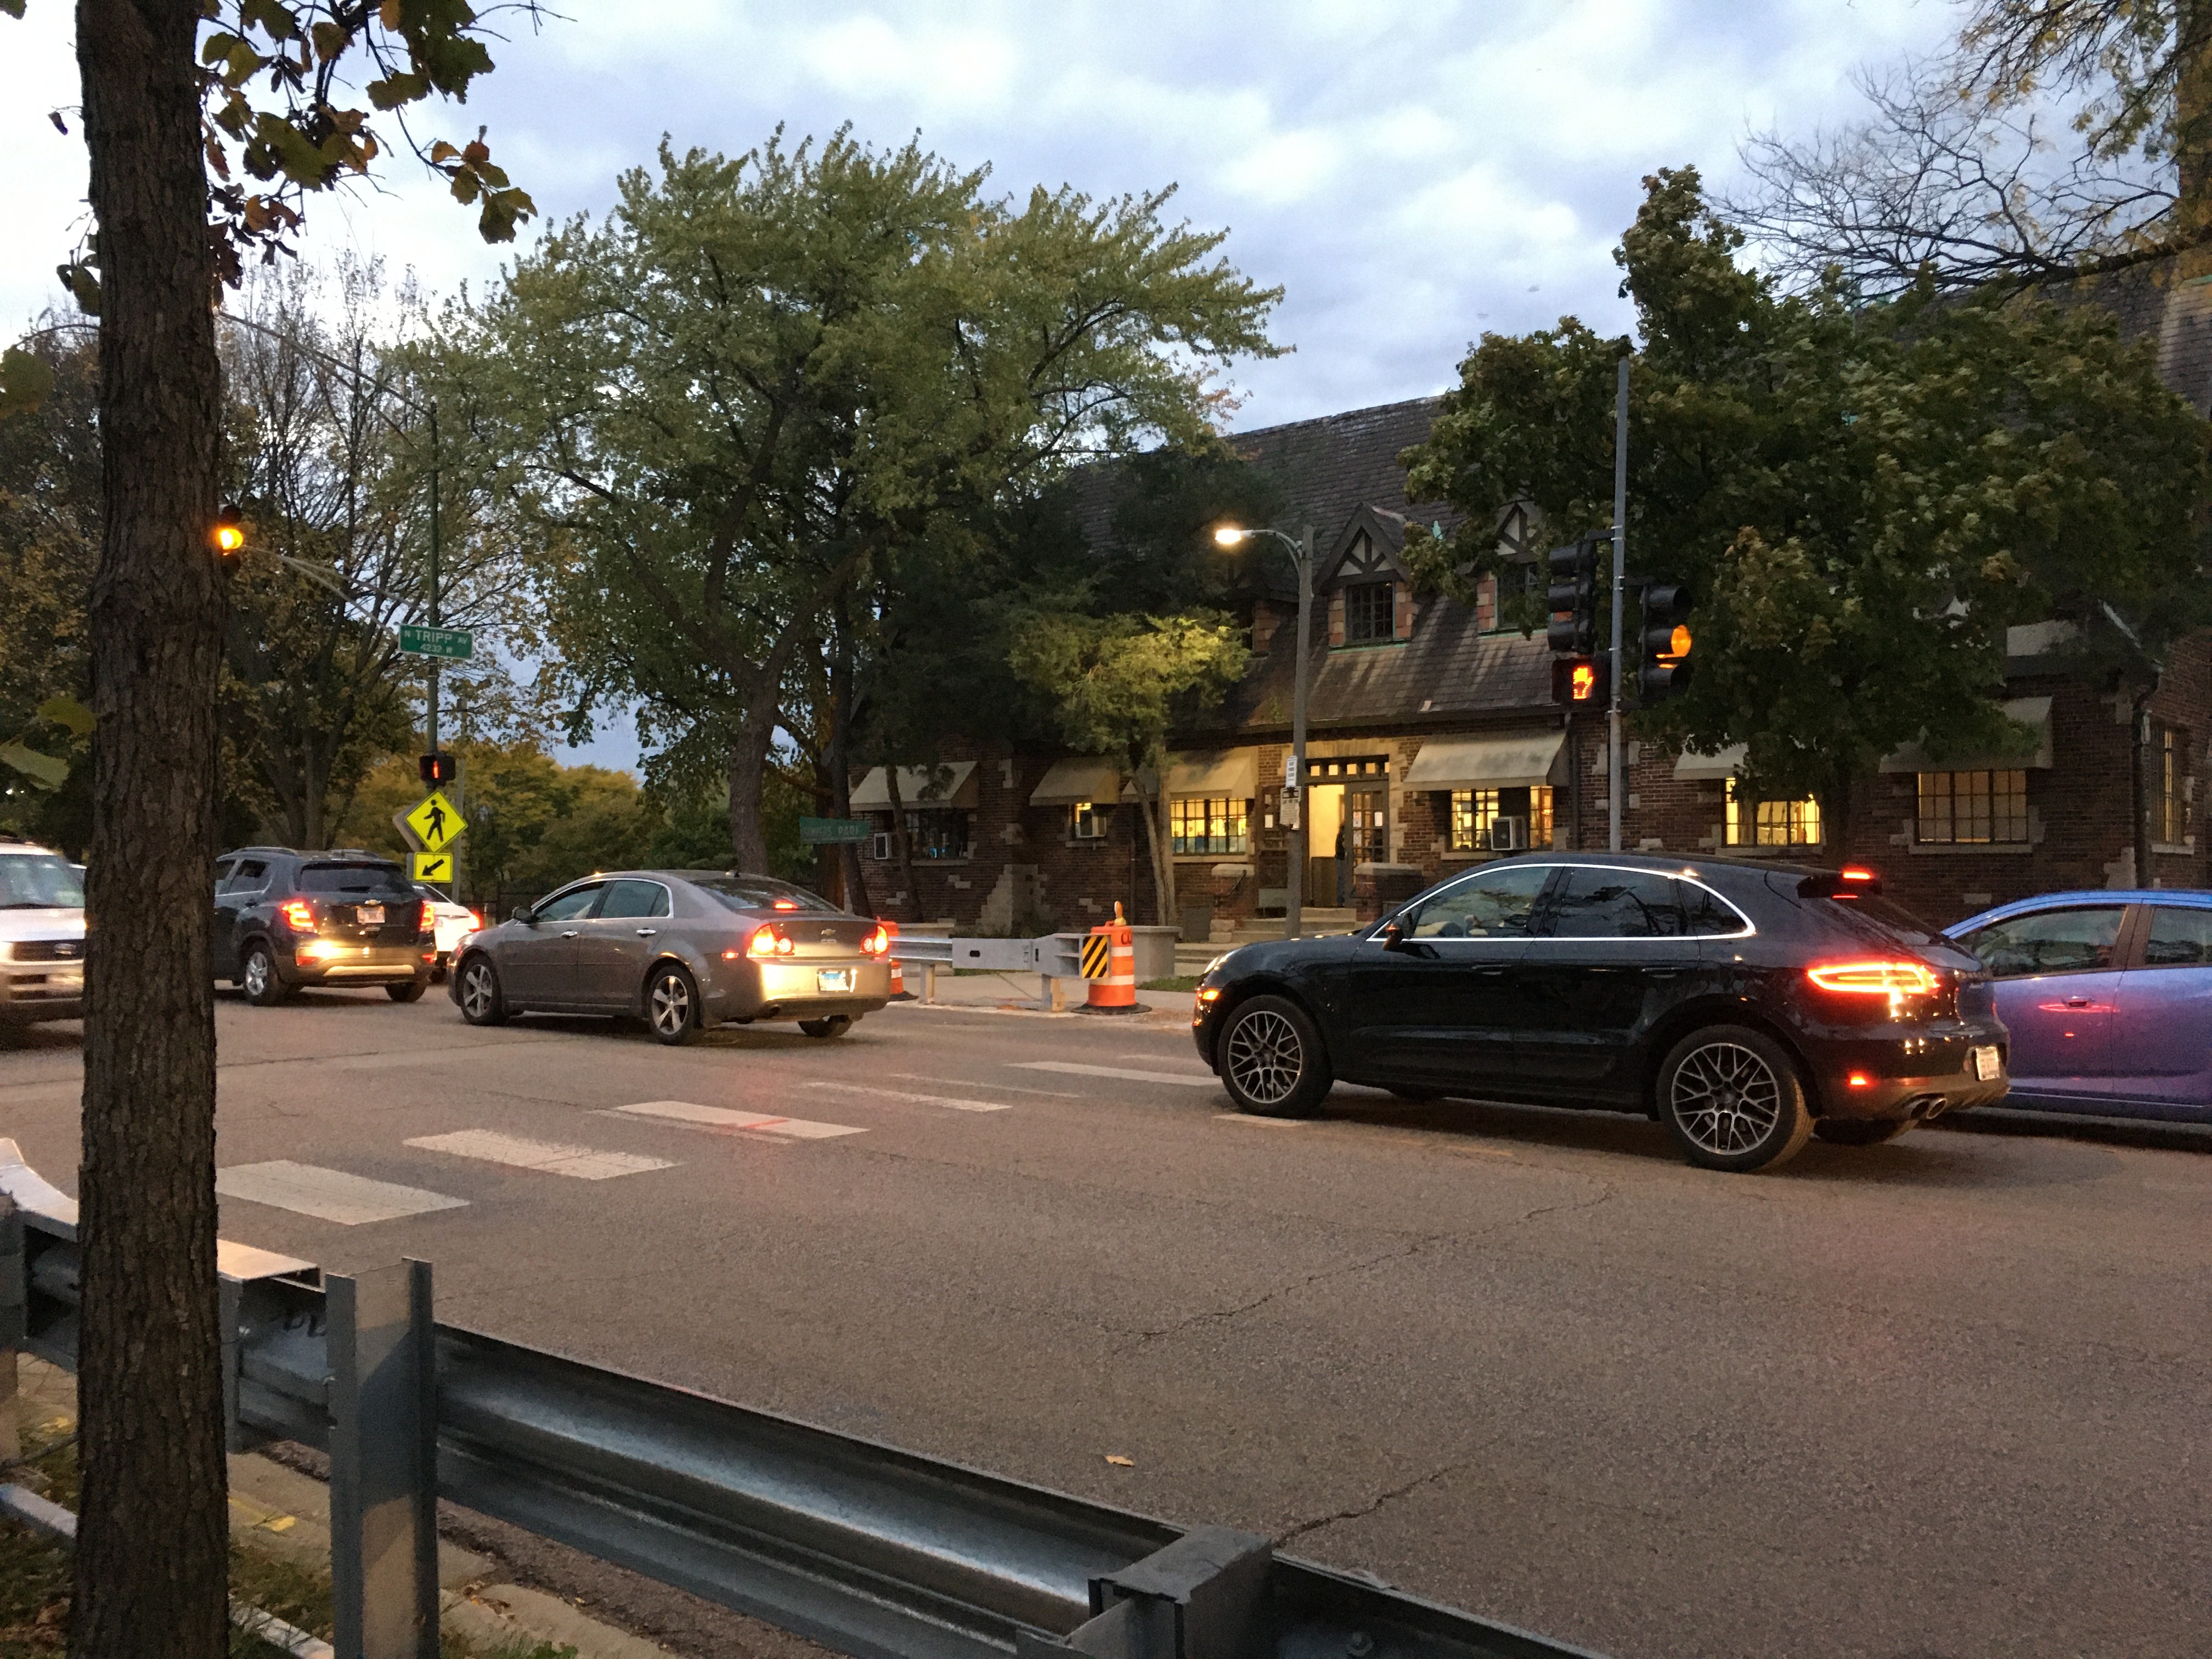 New and improved traffic lights at Foster and Tripp